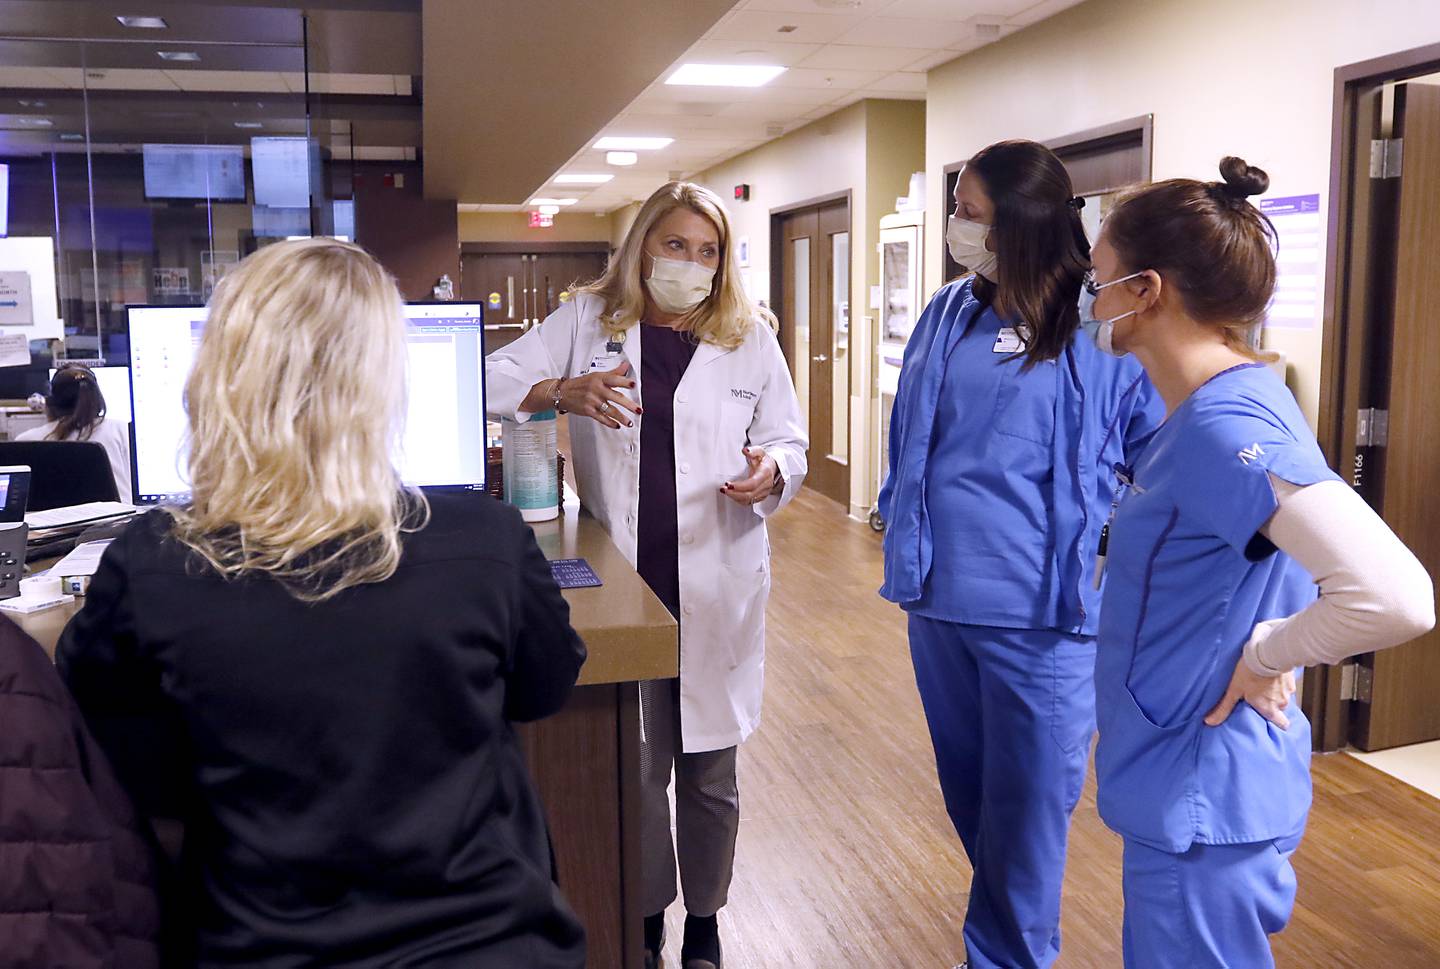 Kim Armour, a Vice President and Chief Nurse Executive at Northwest Medicine Huntley Hospital, talks with members of the hospital’s emergency department patient care team Wednesday, Feb. 16, 2022, while making rounds at the hospital.